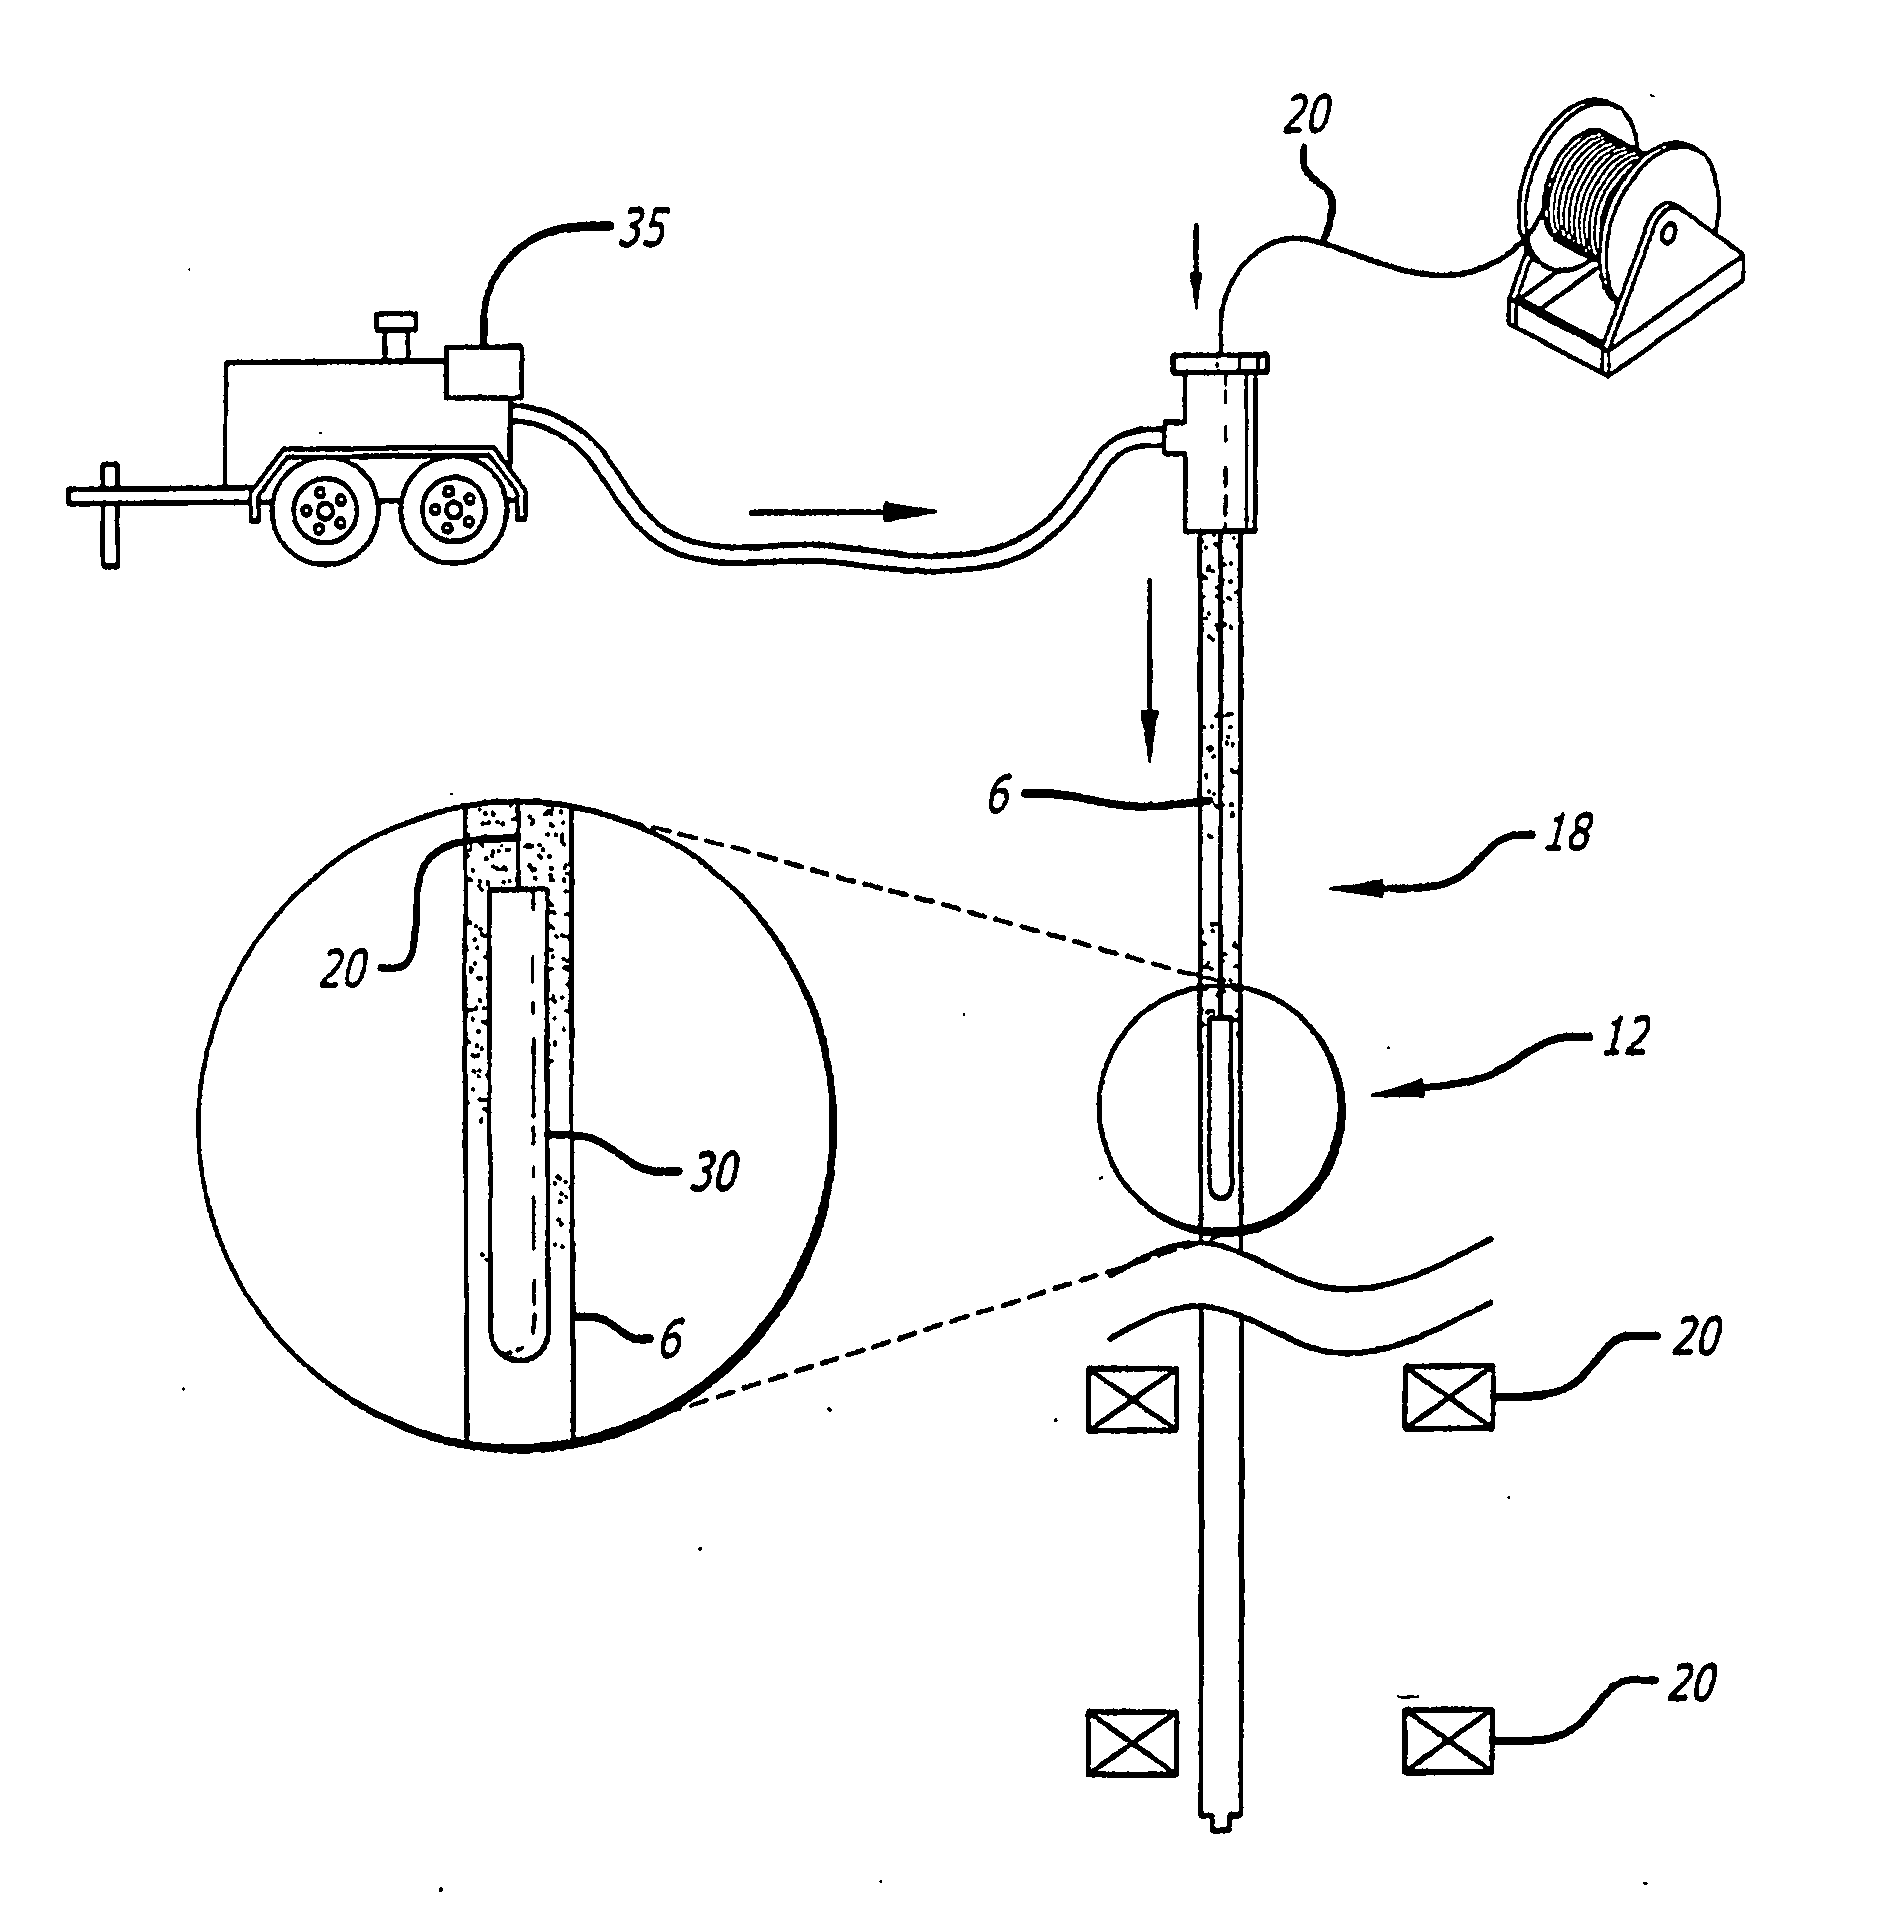 System and method for deploying an optical fiber in a well